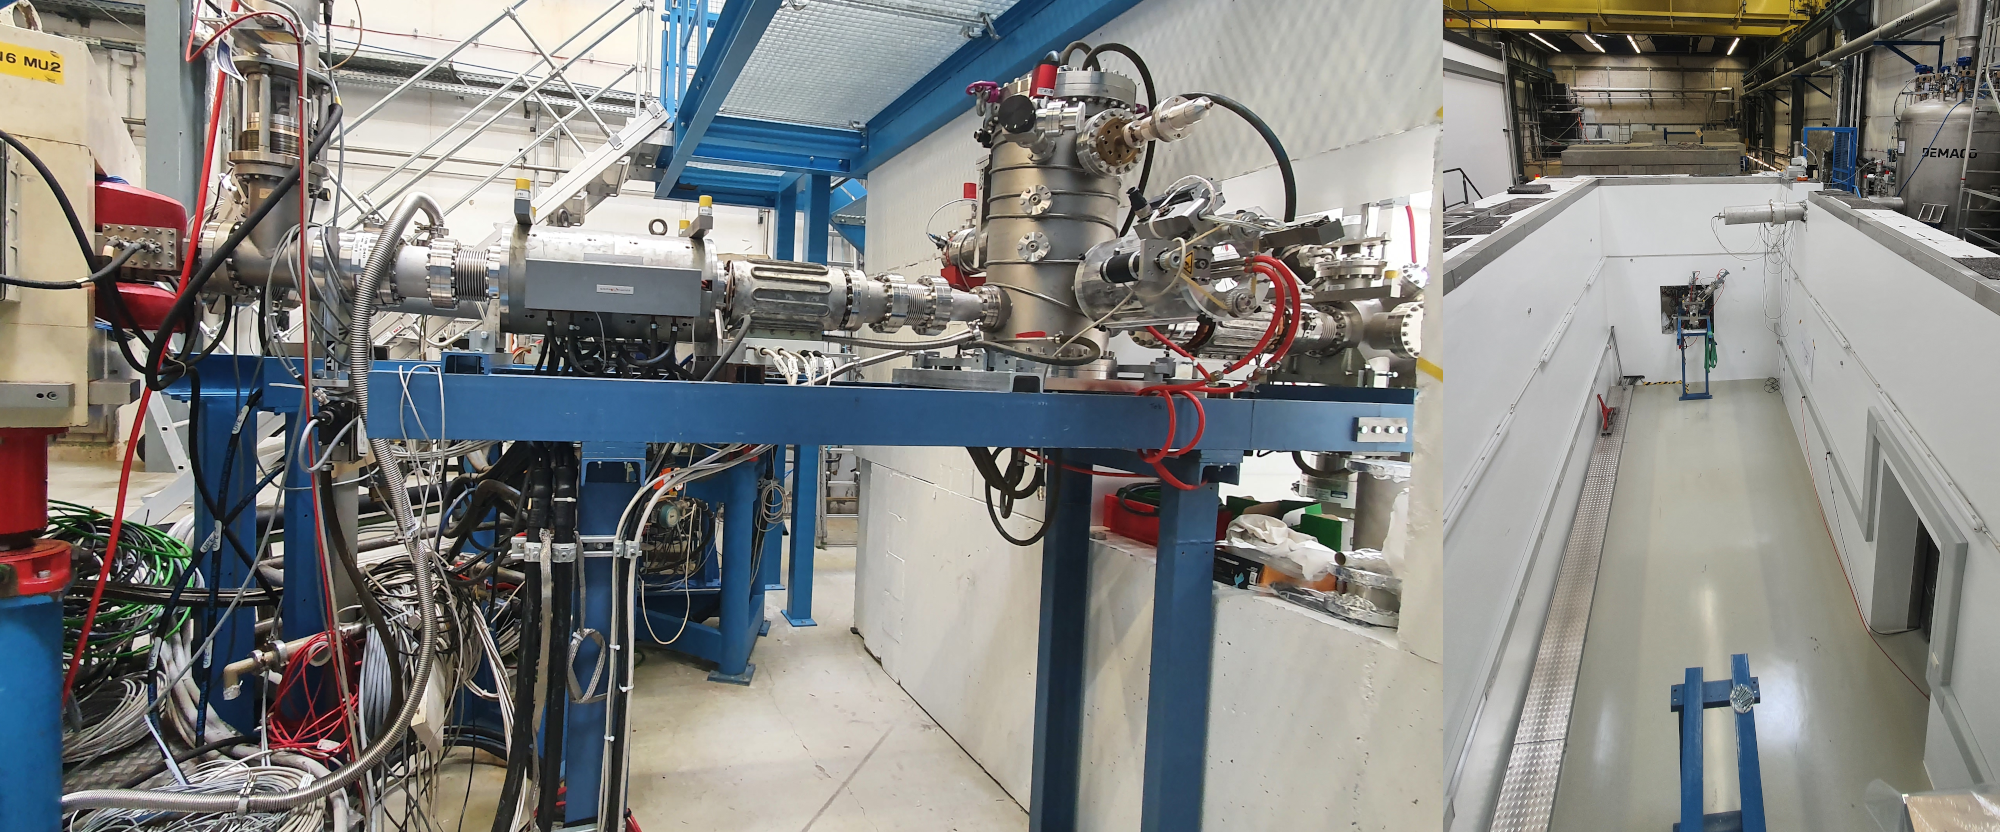 New infrastructure for" Advanced Demonstrator" (HELIAC) accelerator module at GSI